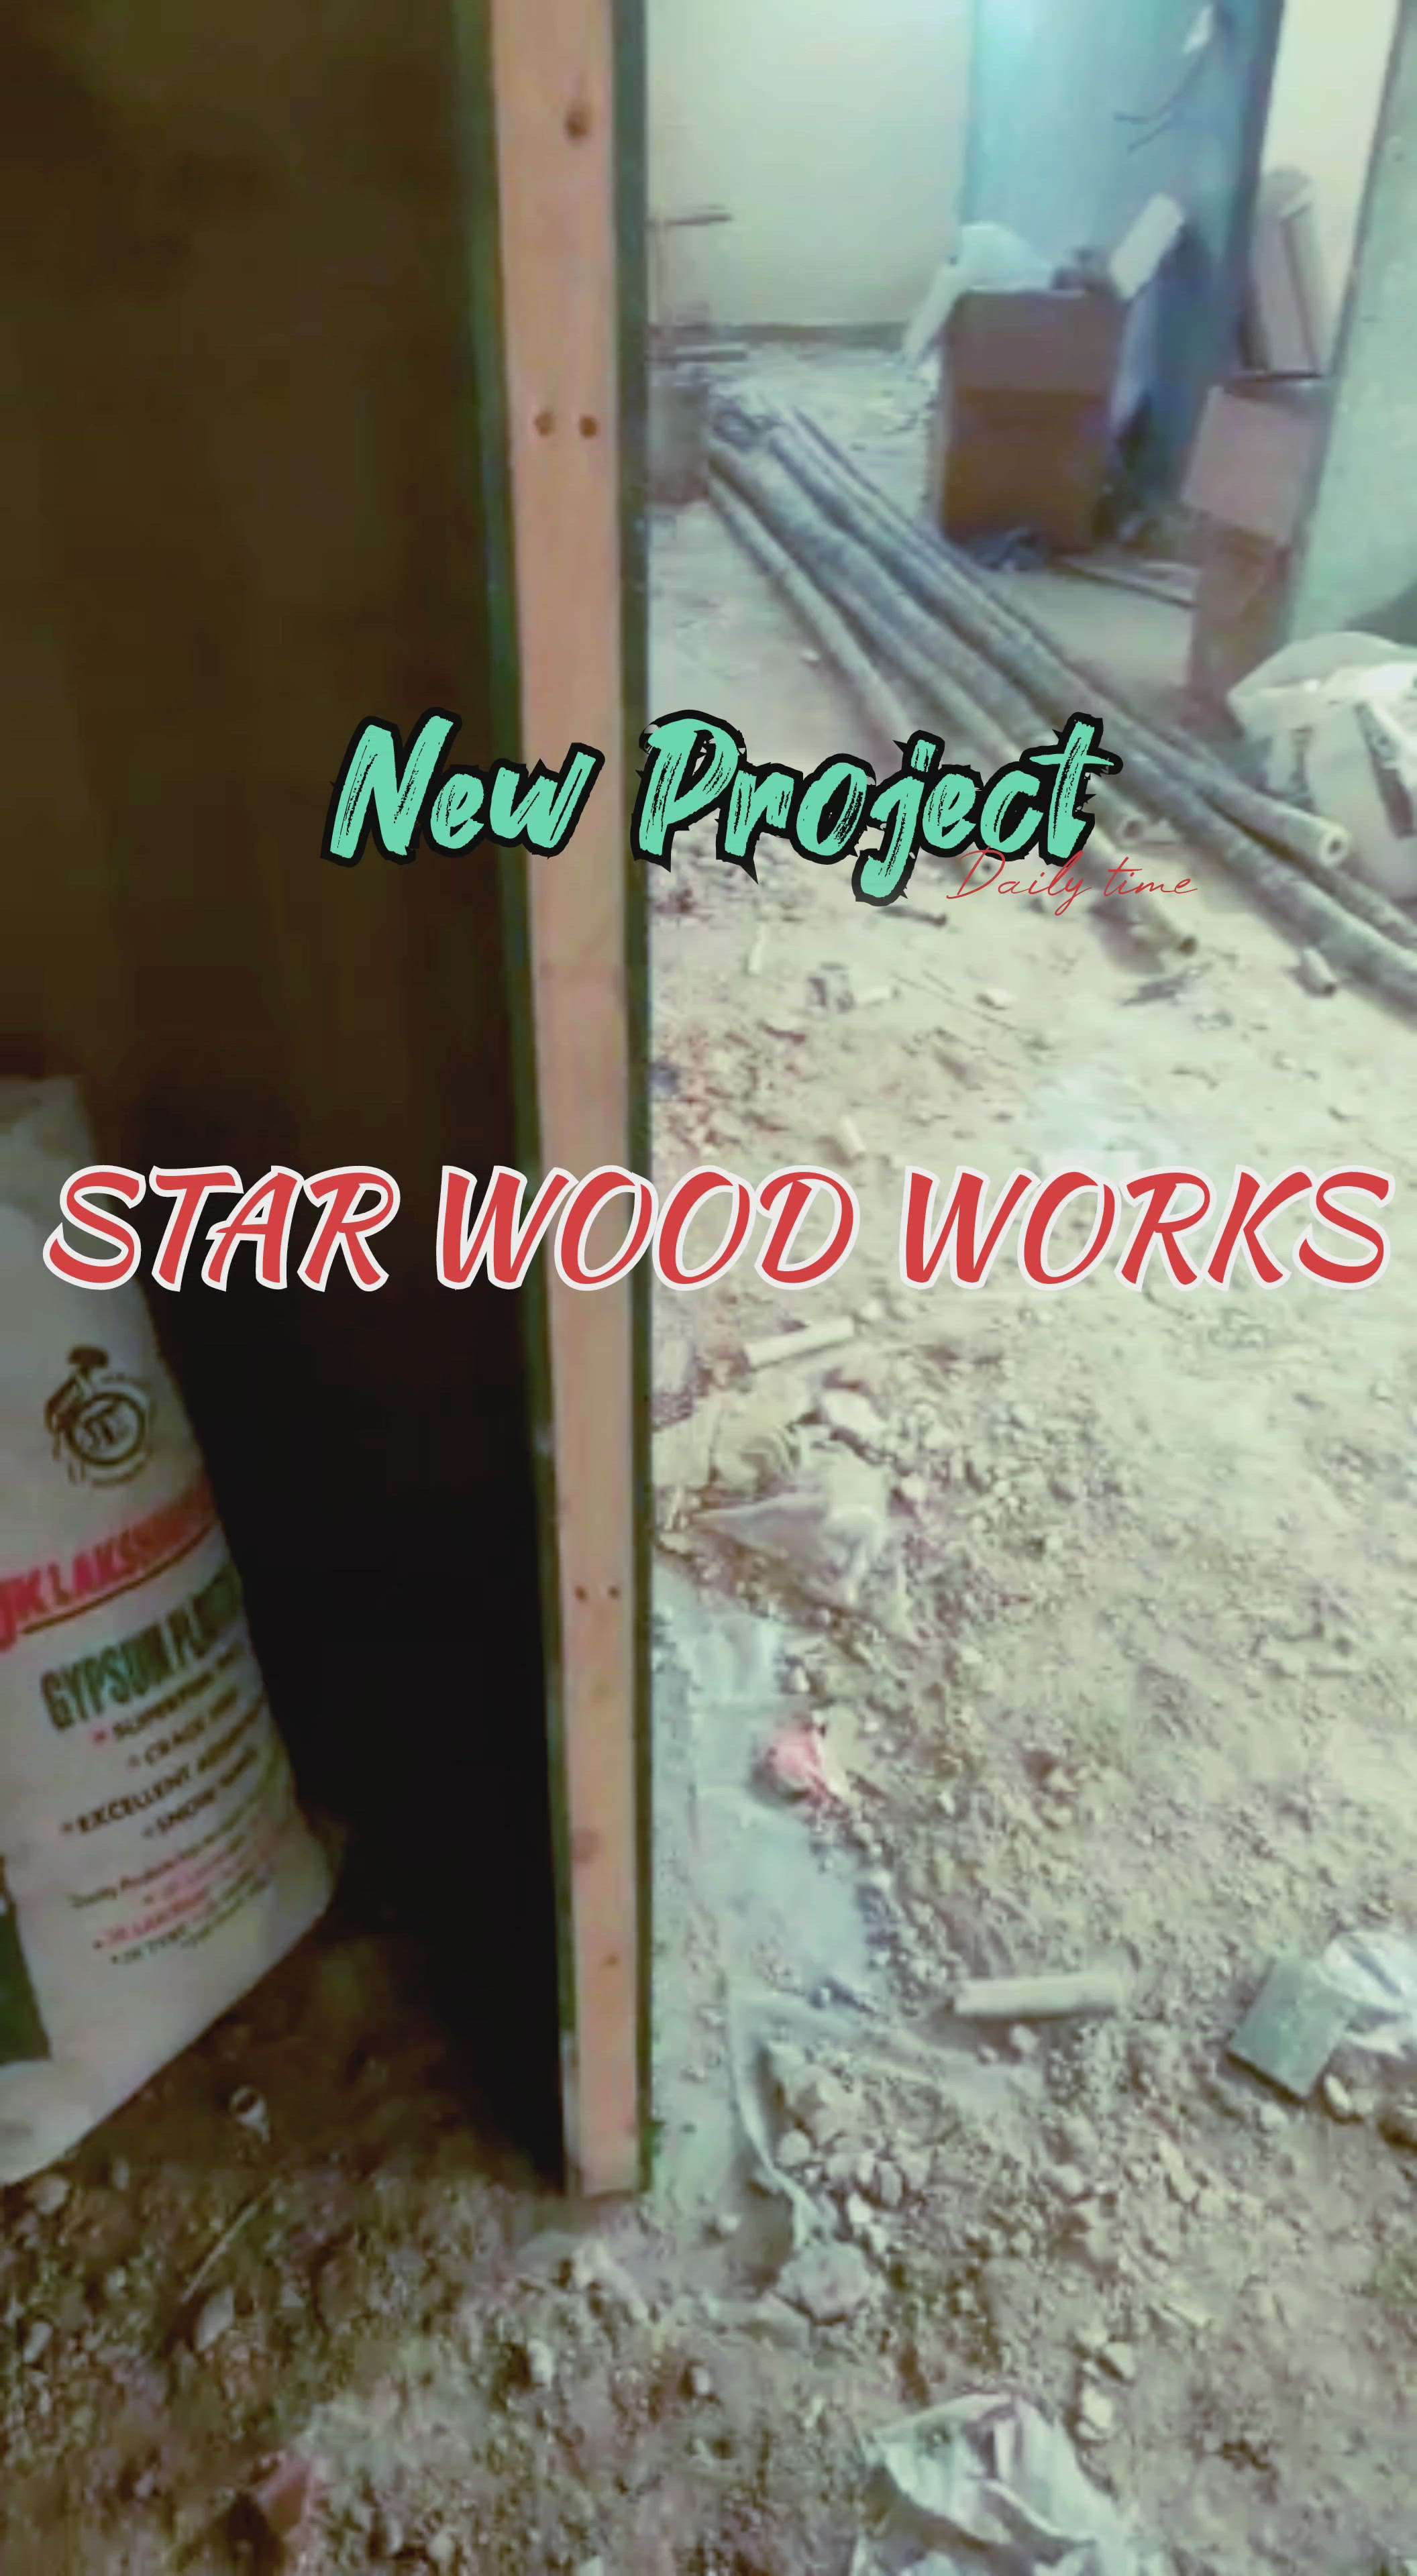 New Project
Contact me for wood works
All kind of wood works done by us
 #InteriorDesigner  #KitchenInterior  #architecturedesigns  #Architect  #LUXURY_INTERIOR  #Architectural&Interior  #wood  #Woodenfurniture  #furnitures